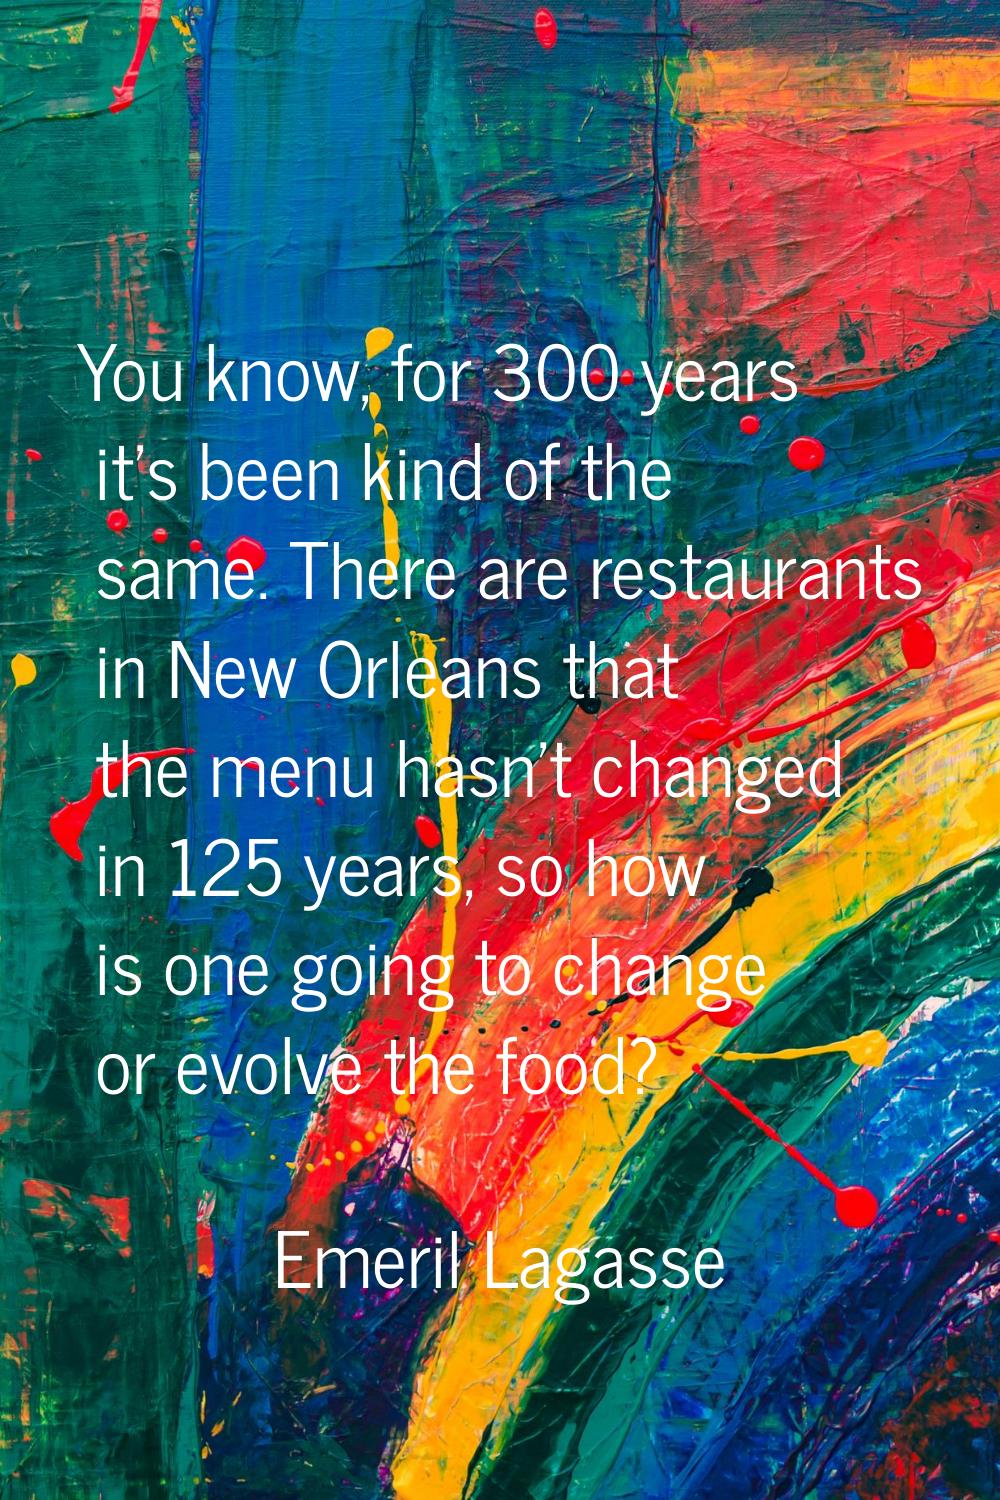 You know, for 300 years it's been kind of the same. There are restaurants in New Orleans that the m